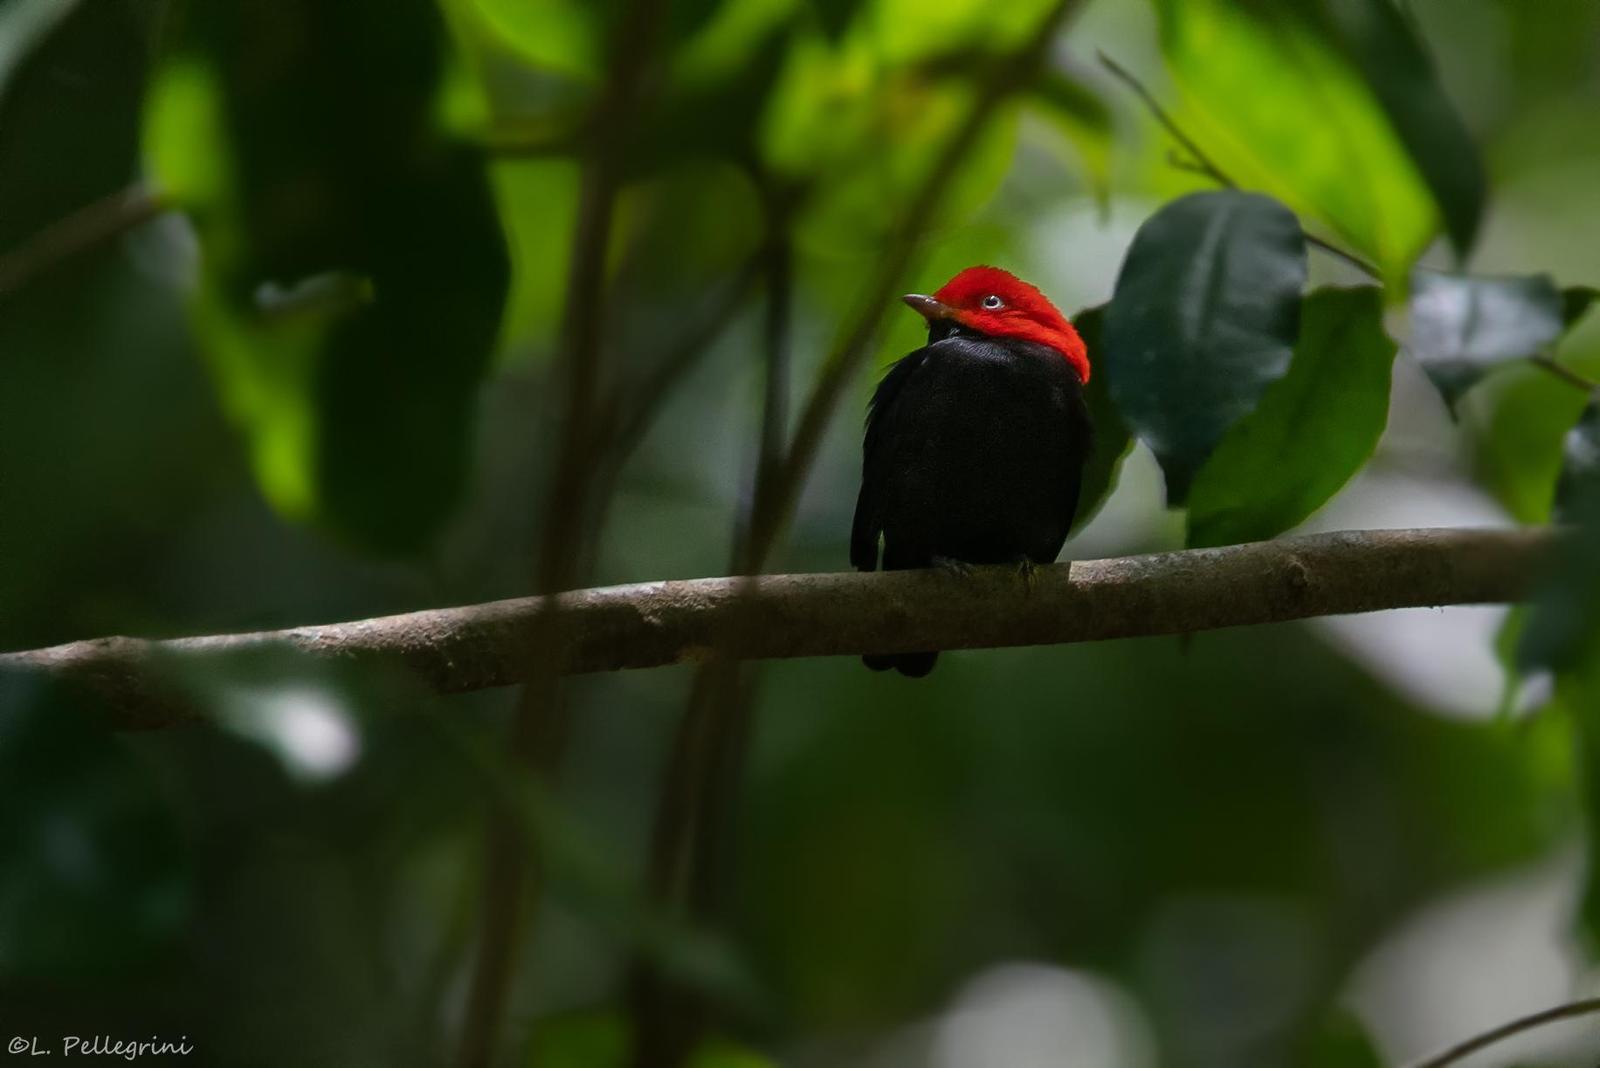 Red-capped Manakin Photo by Laurence Pellegrini